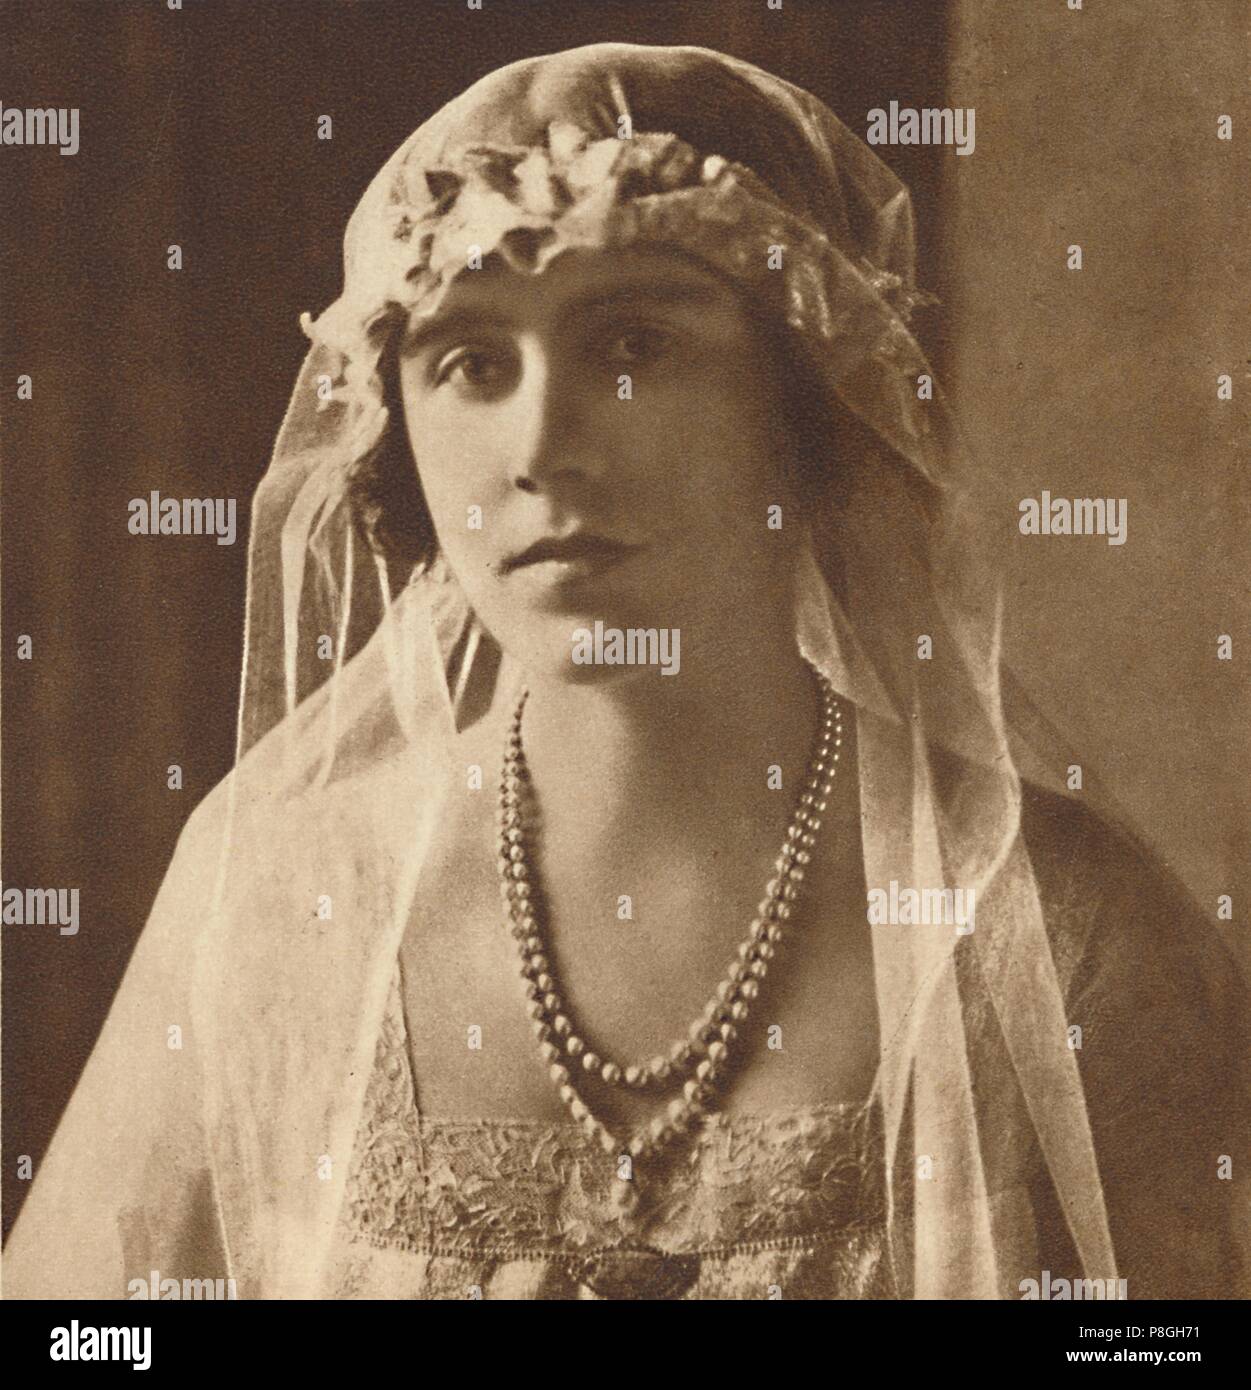 'Bridesmaid at wedding of Princess Mary and Viscount Lascelles (now the Princess Royal and the Earl of Harewood), February 28th, 1922', 1937. From Cor Stock Photo